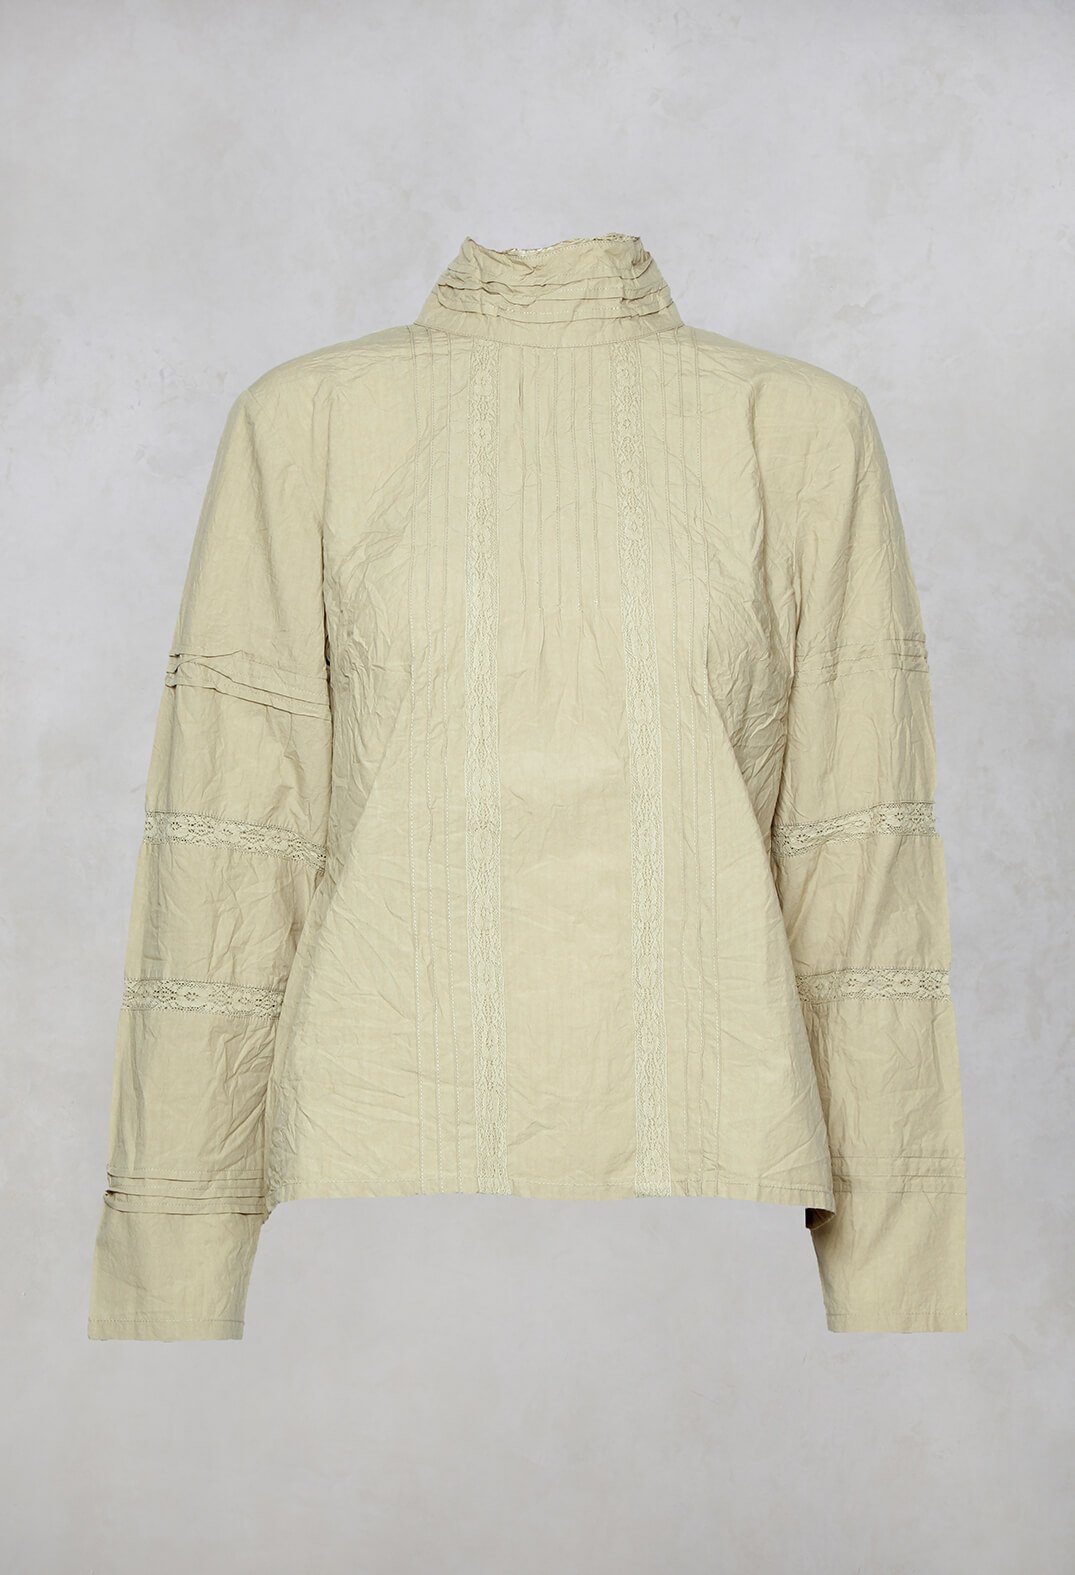 Long Sleeved Blouse with High Collar and Lace Details in Khaki